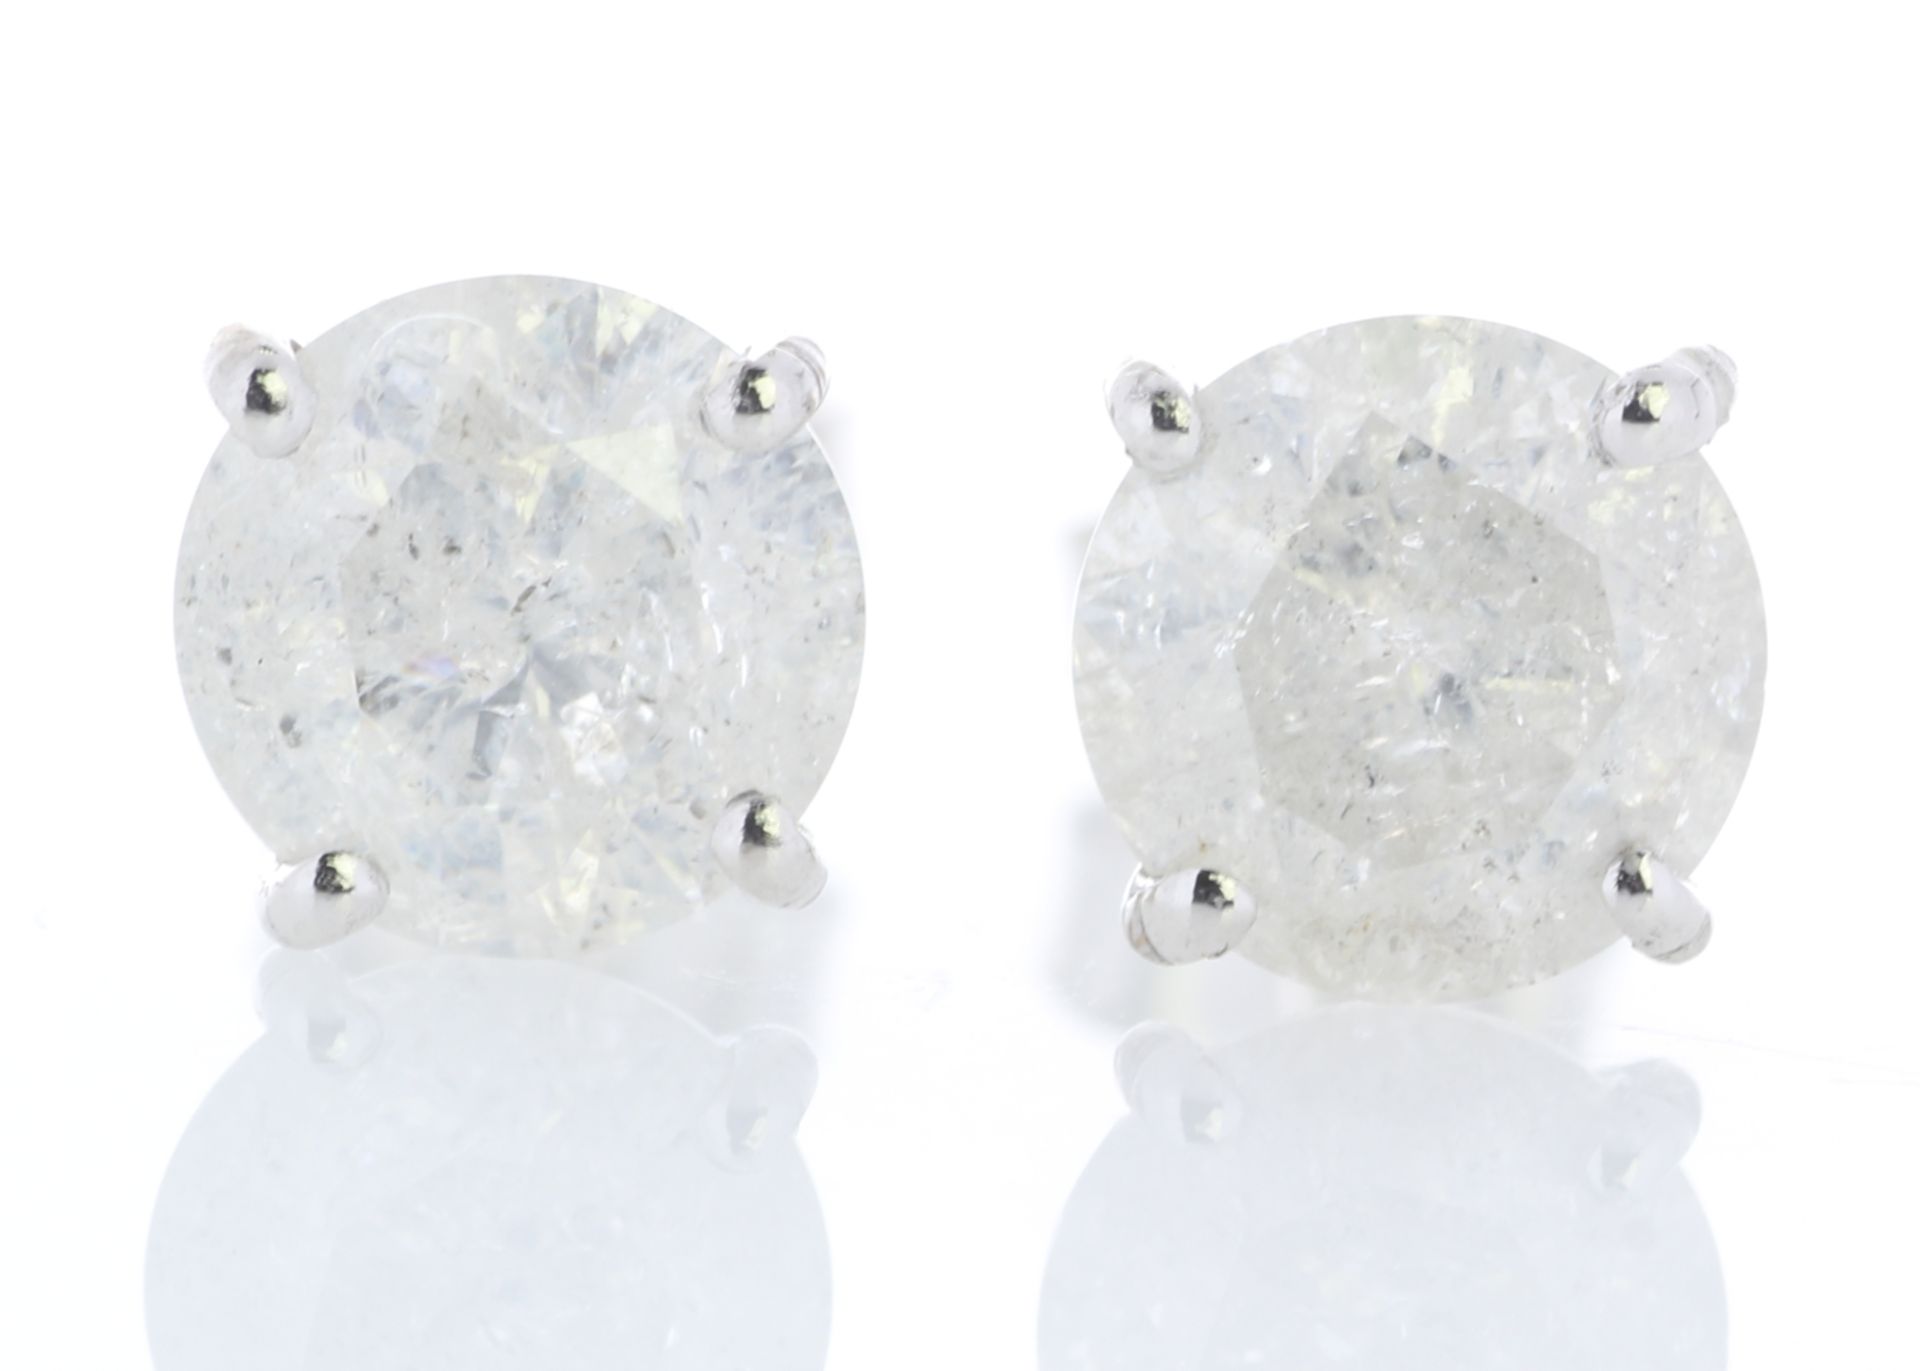 ***£8,679.00*** UNUSED - Certified by GIE 18ct White Gold Single Stone Prong Set Diamond Earring 2.